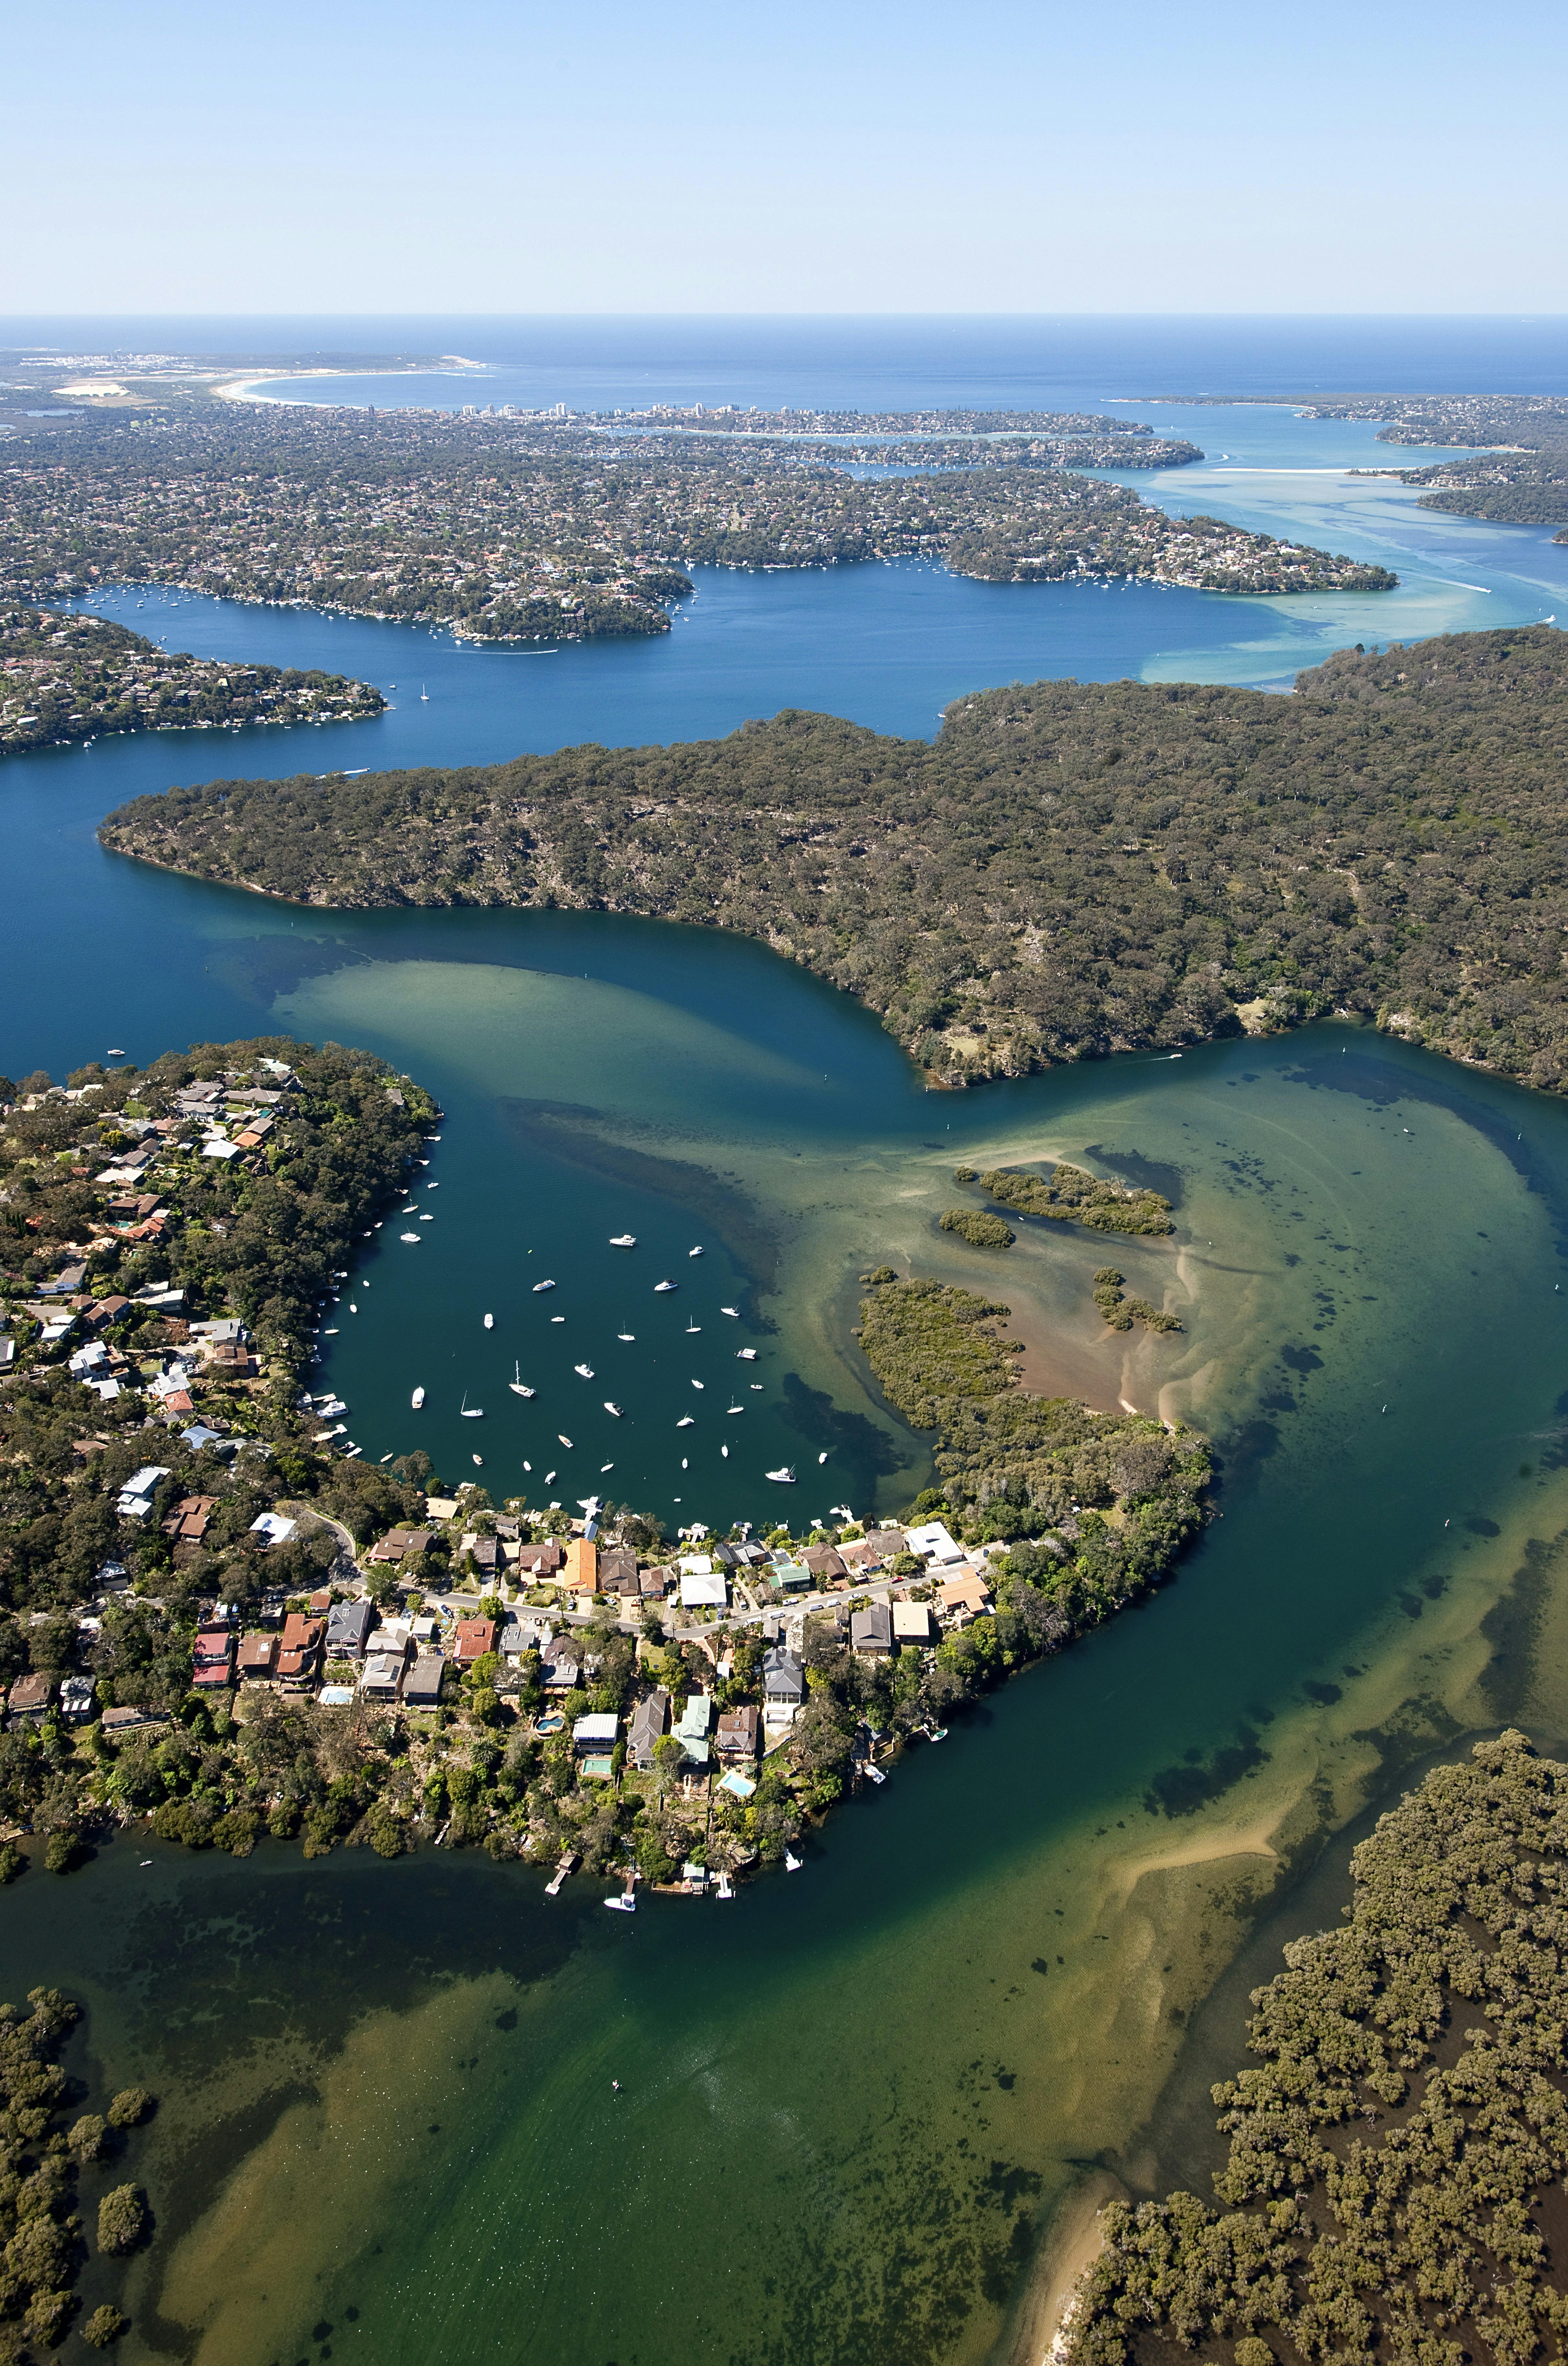 Hacking River and Port Hacking